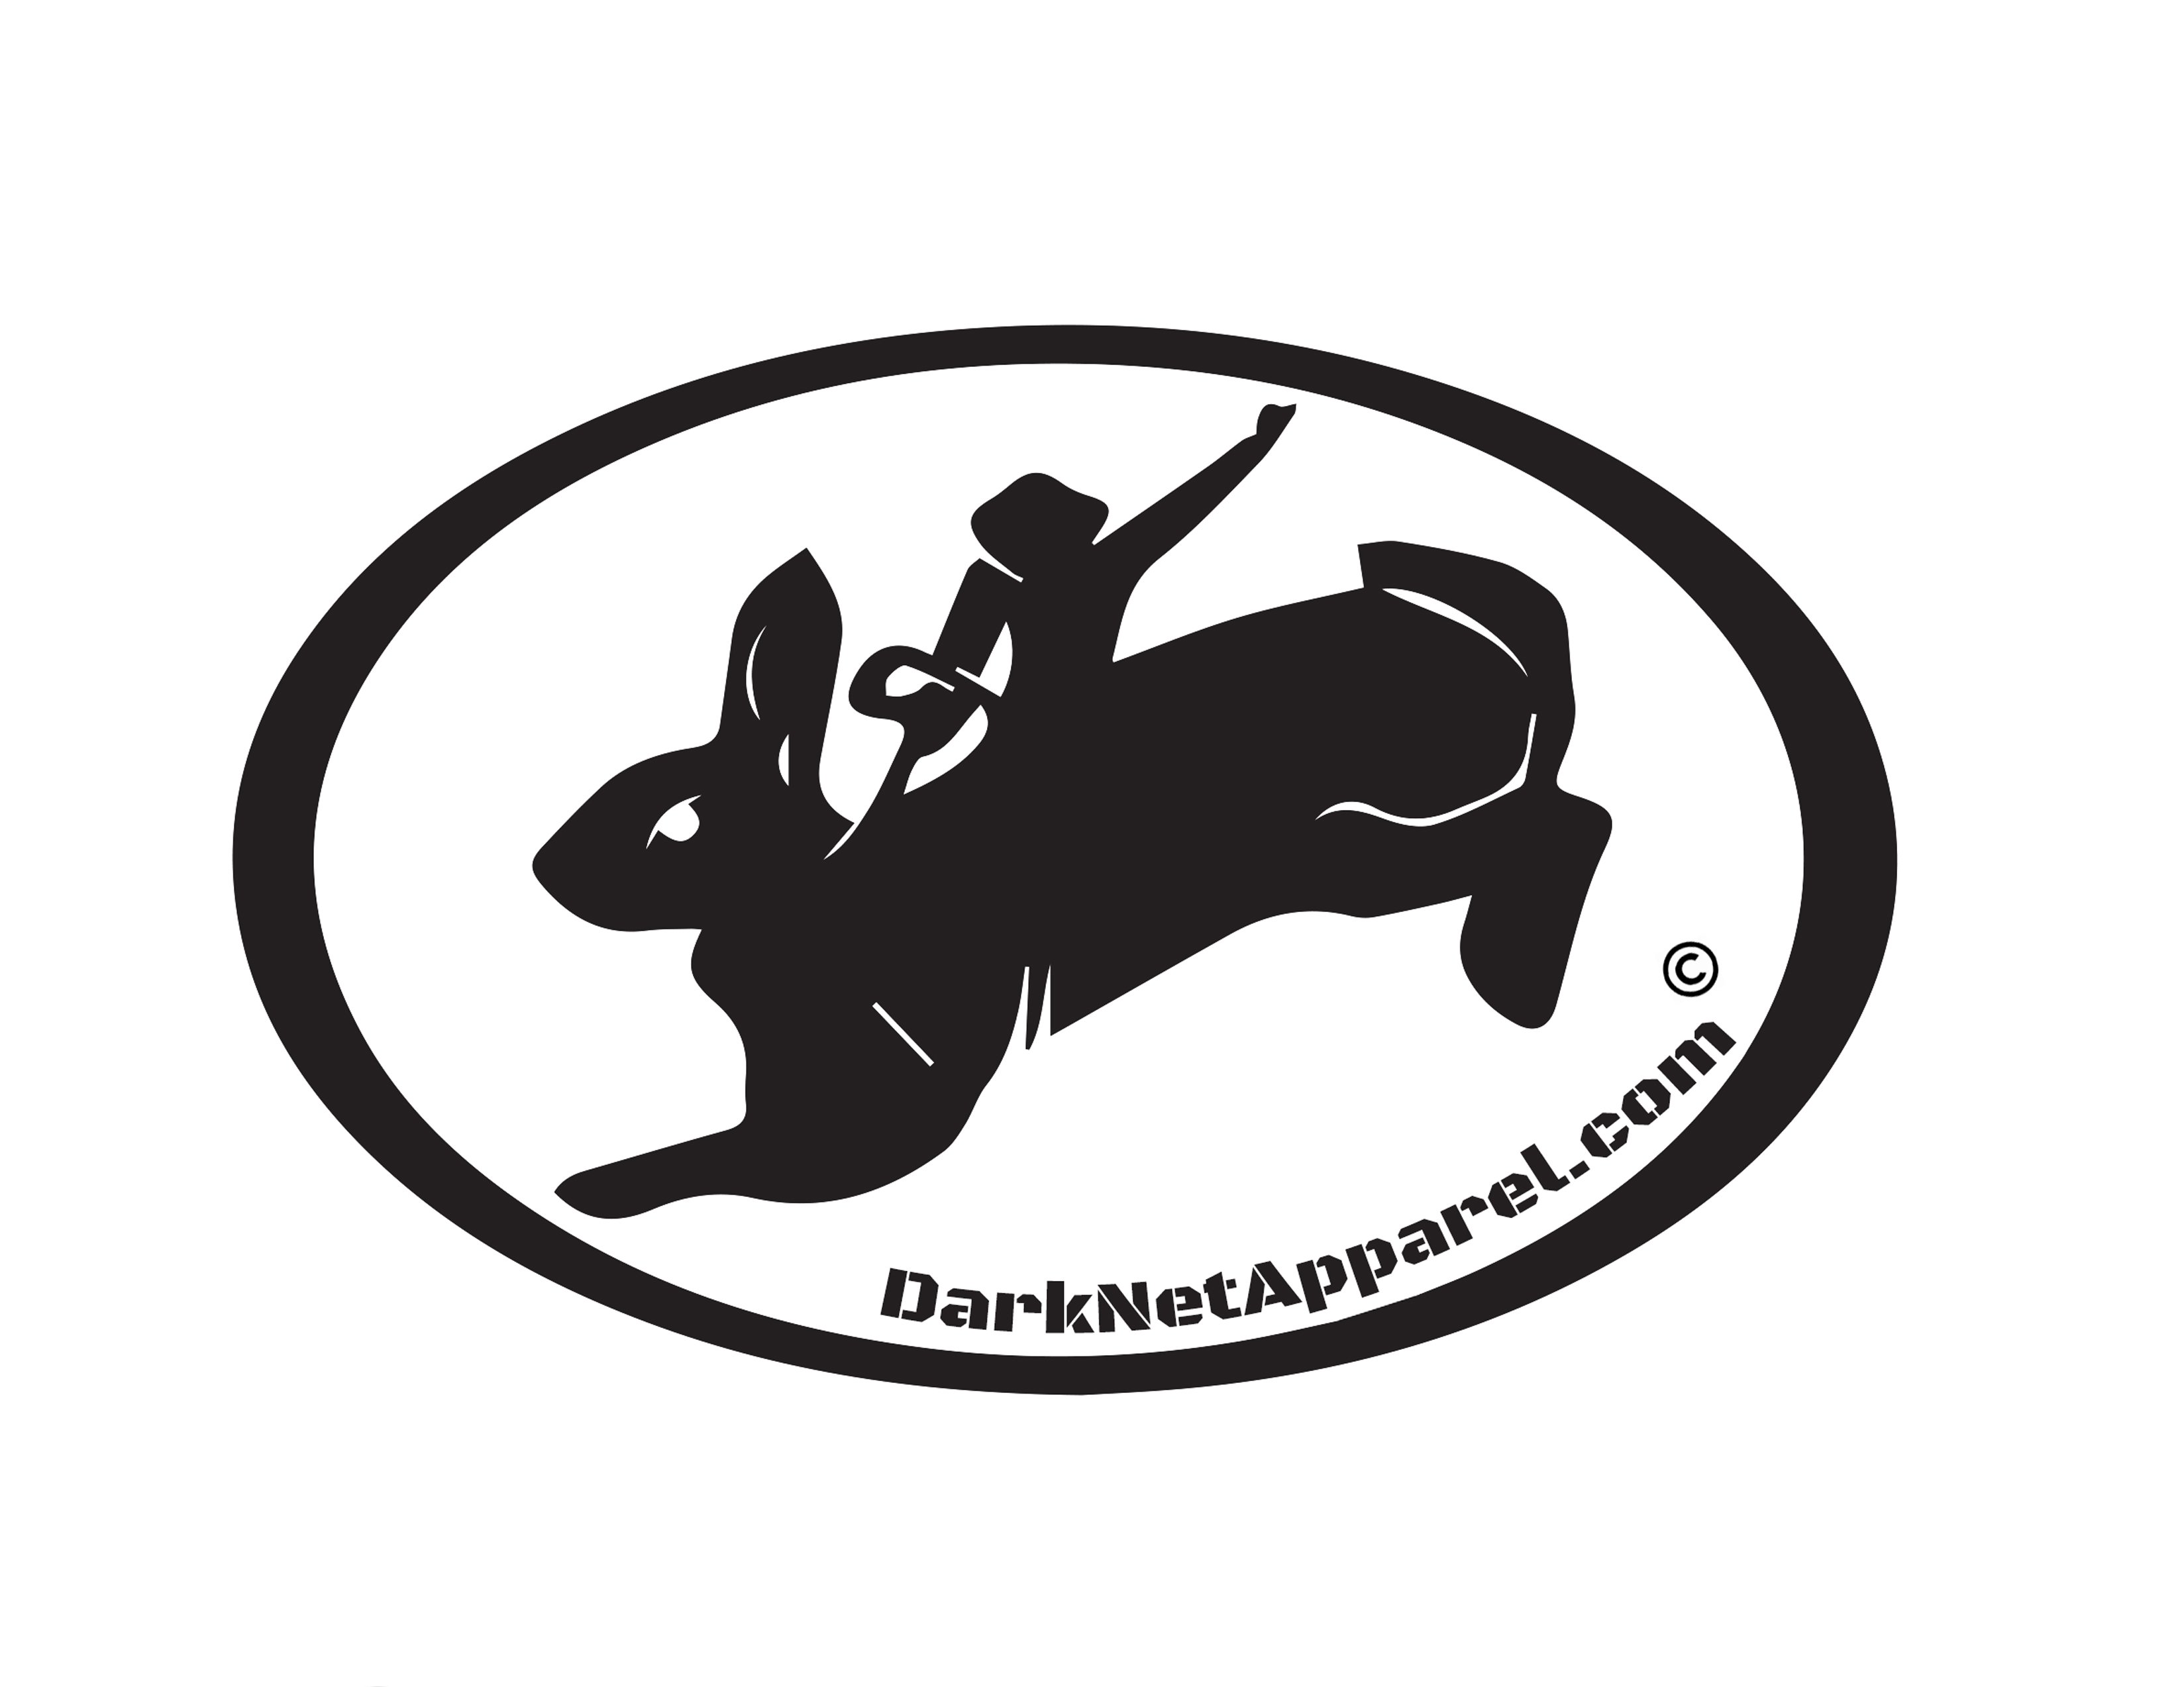 Small Creative T-shirt company in Las Vegas Nevada. Creating eco-friendly products. DarkNet Apparel - A Little Something For Everyone.